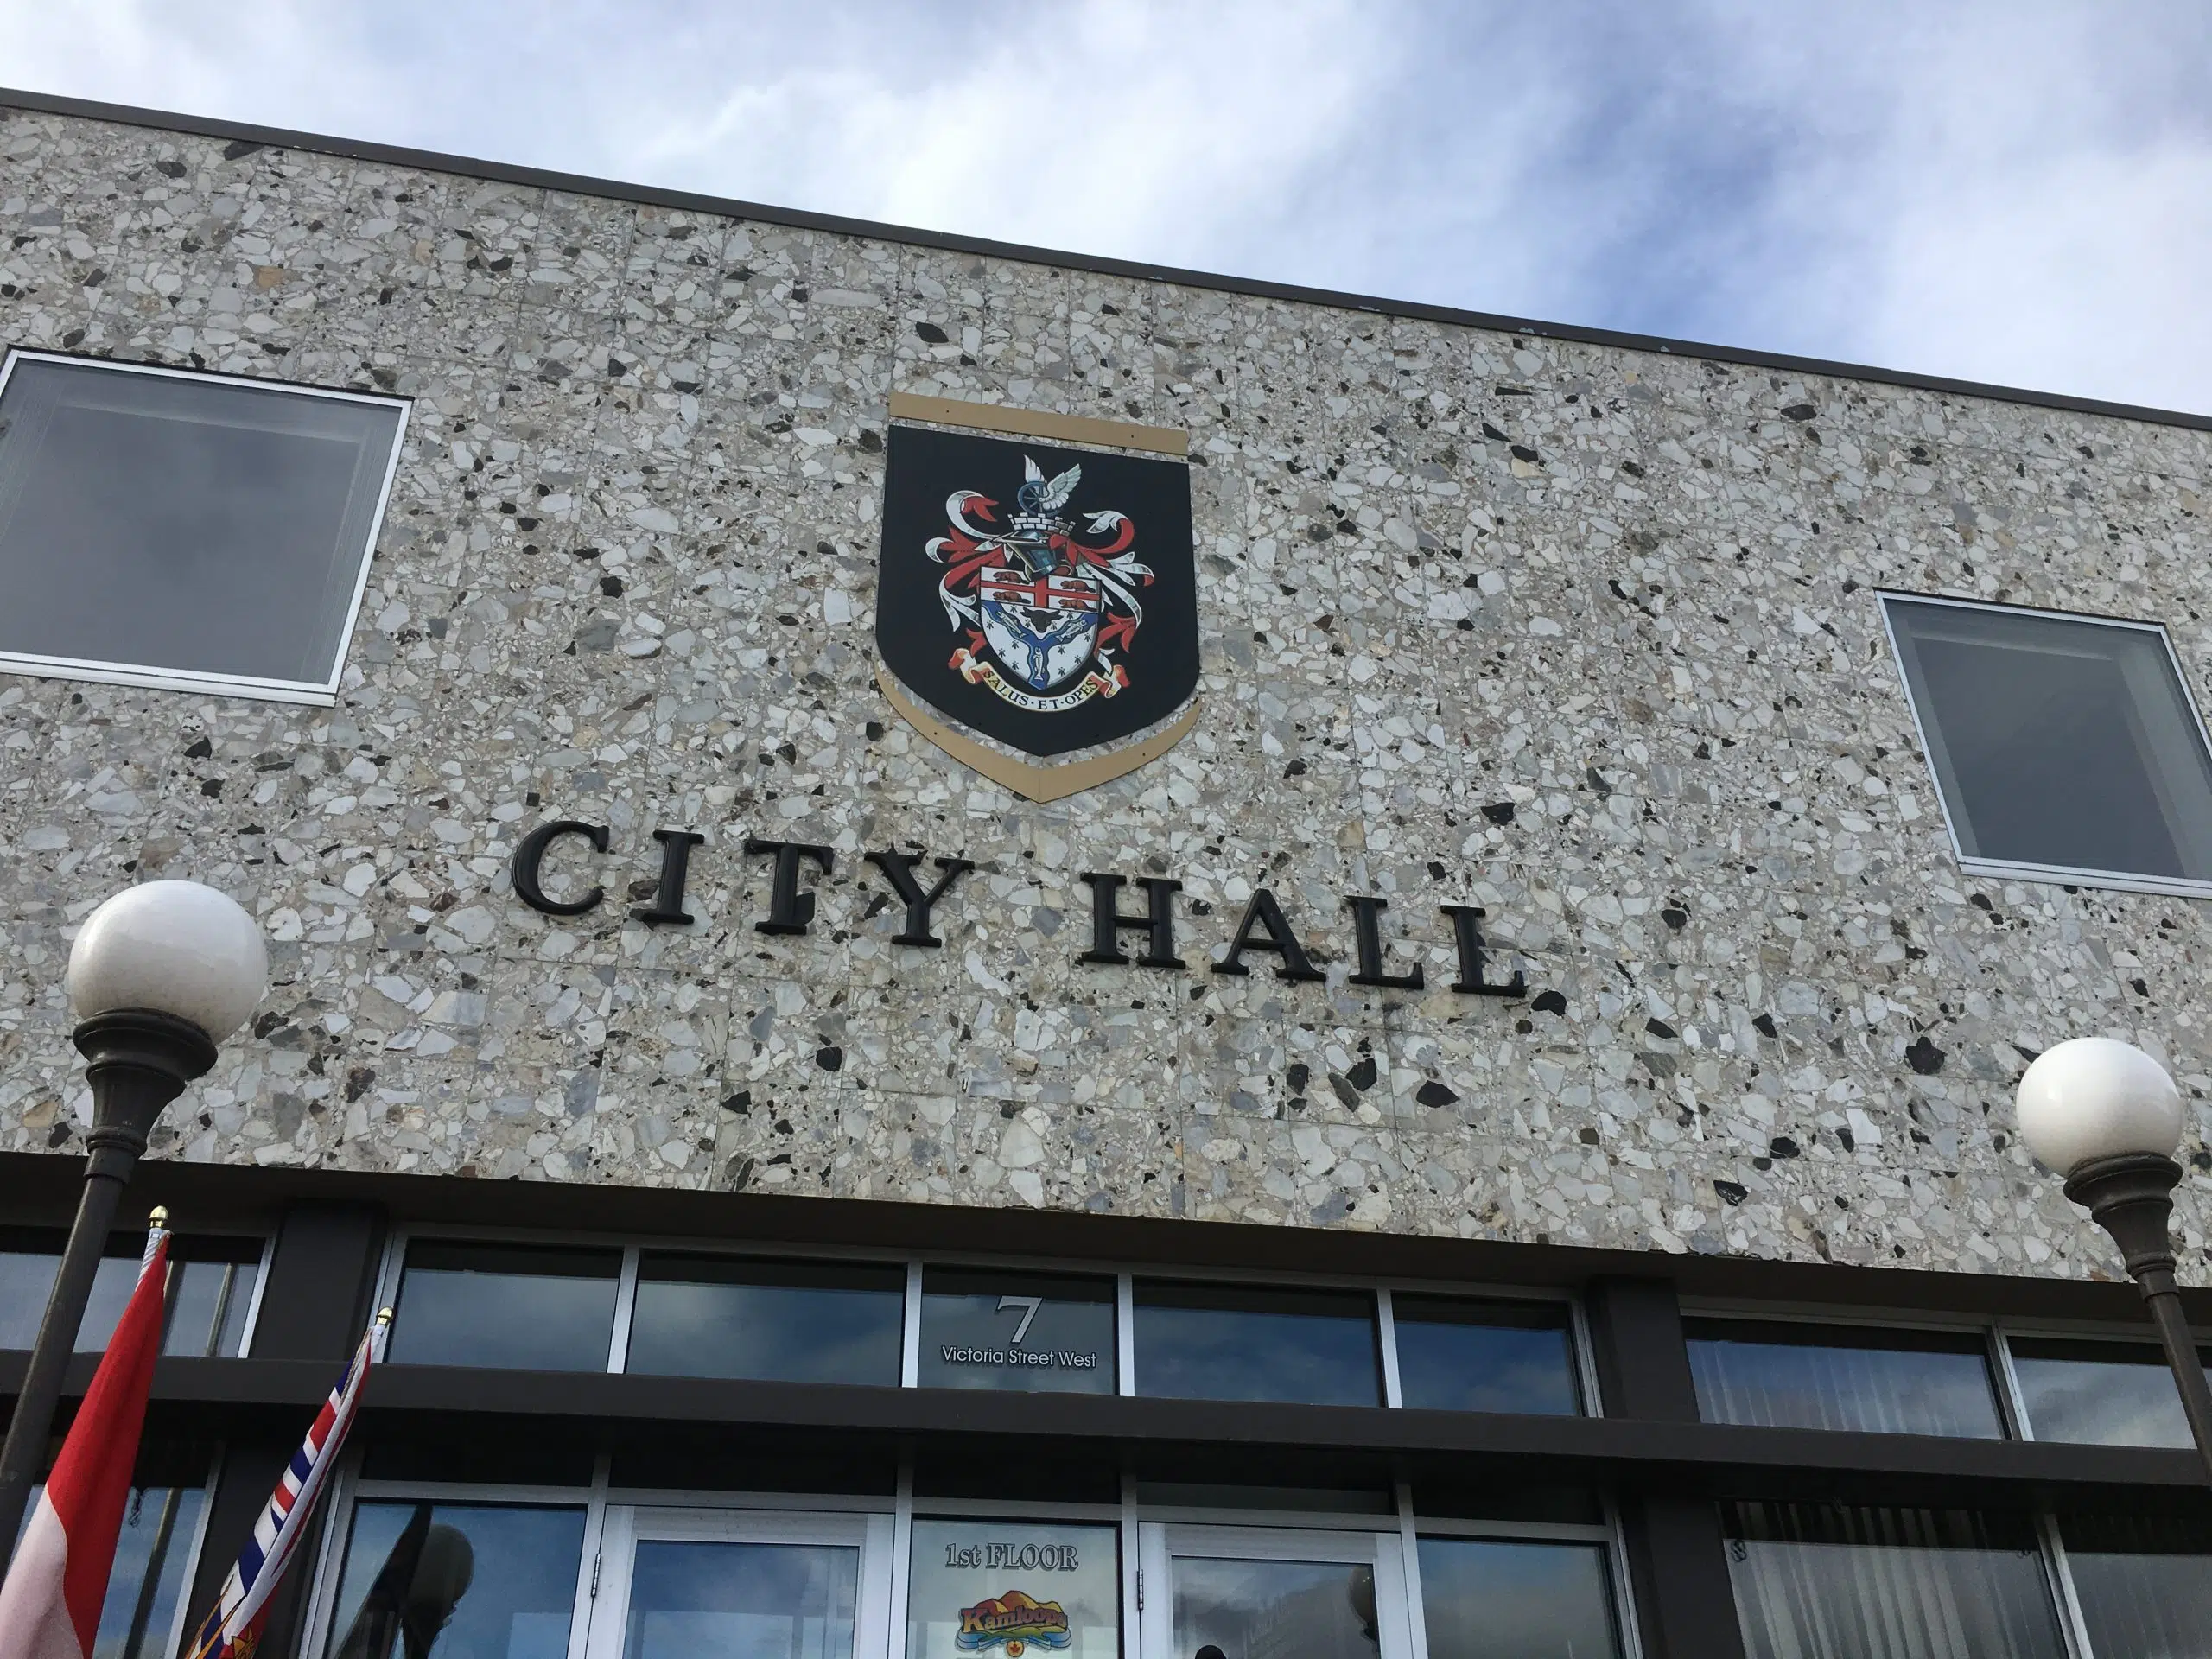 Steps being taken to get the city on the same page as Venture Kamloops